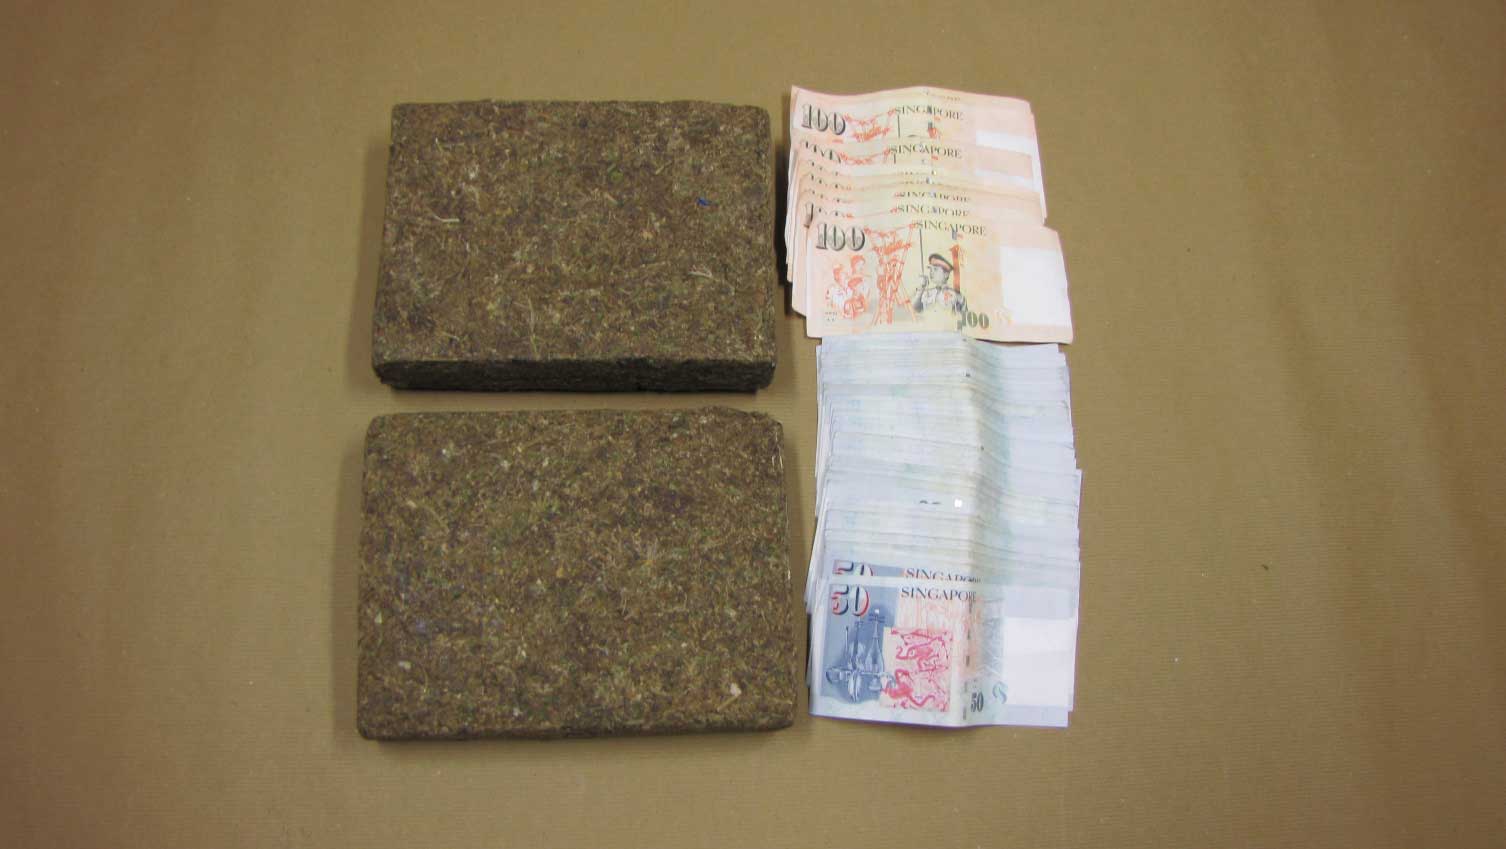 Photo 3: The cannabis and cash that was seized in CNB’s operation on 26 Nov 2015